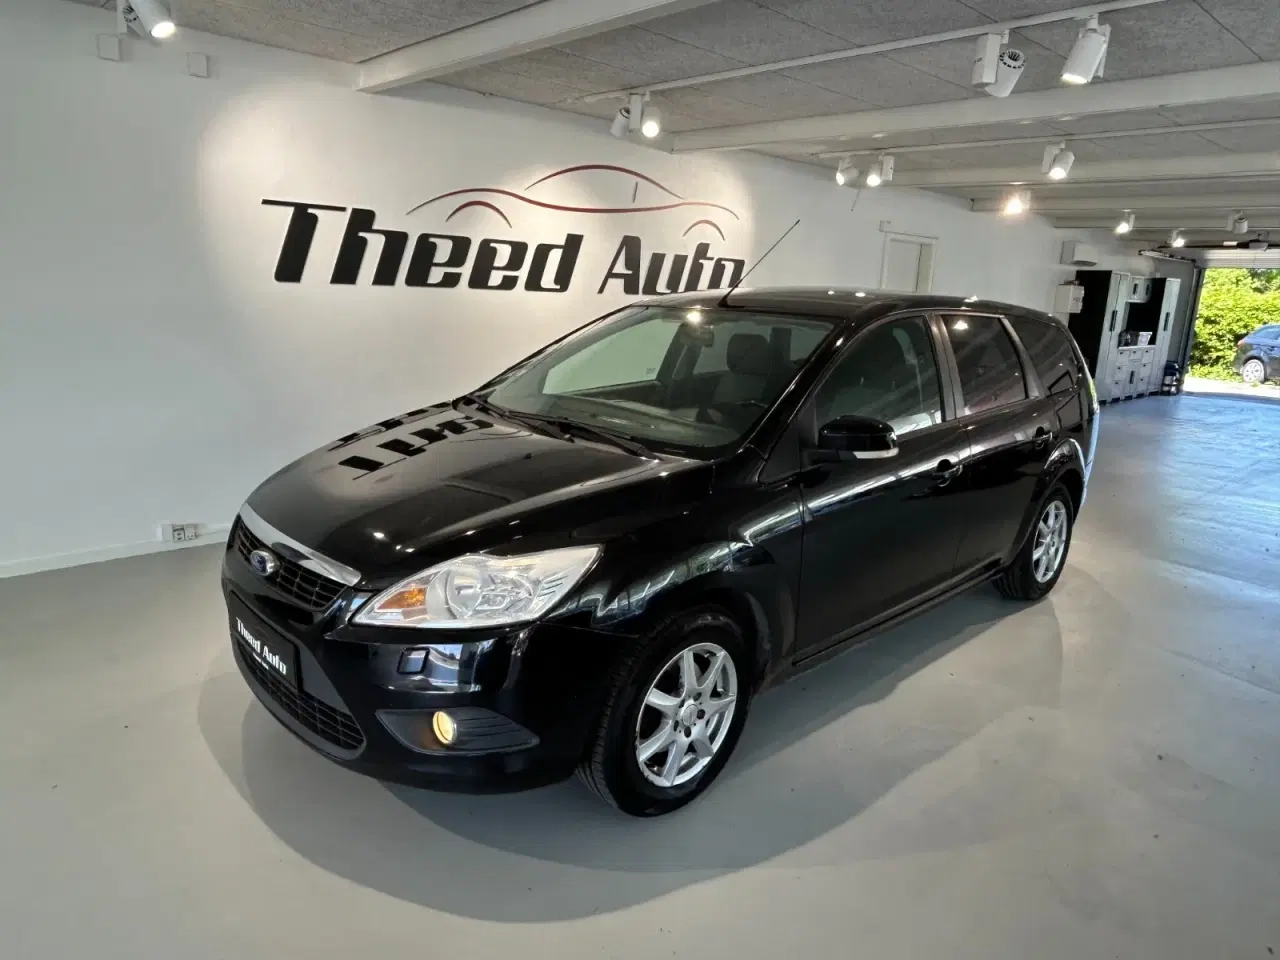 Billede 1 - Ford Focus 1,6 TDCi 109 Trend Collection stc.